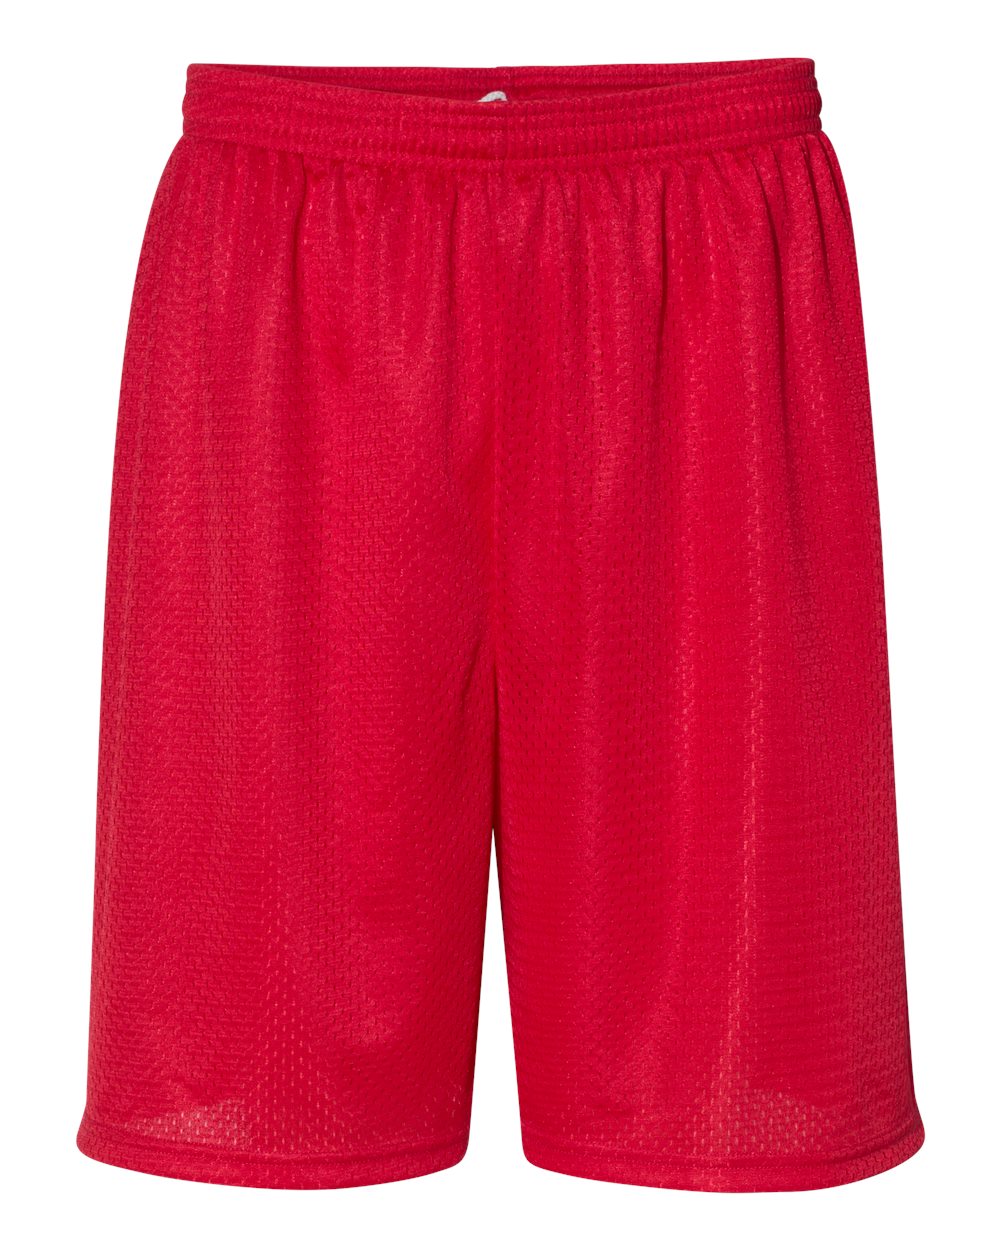 C2 Sport Mesh 7" Shorts 5107 #color_Red